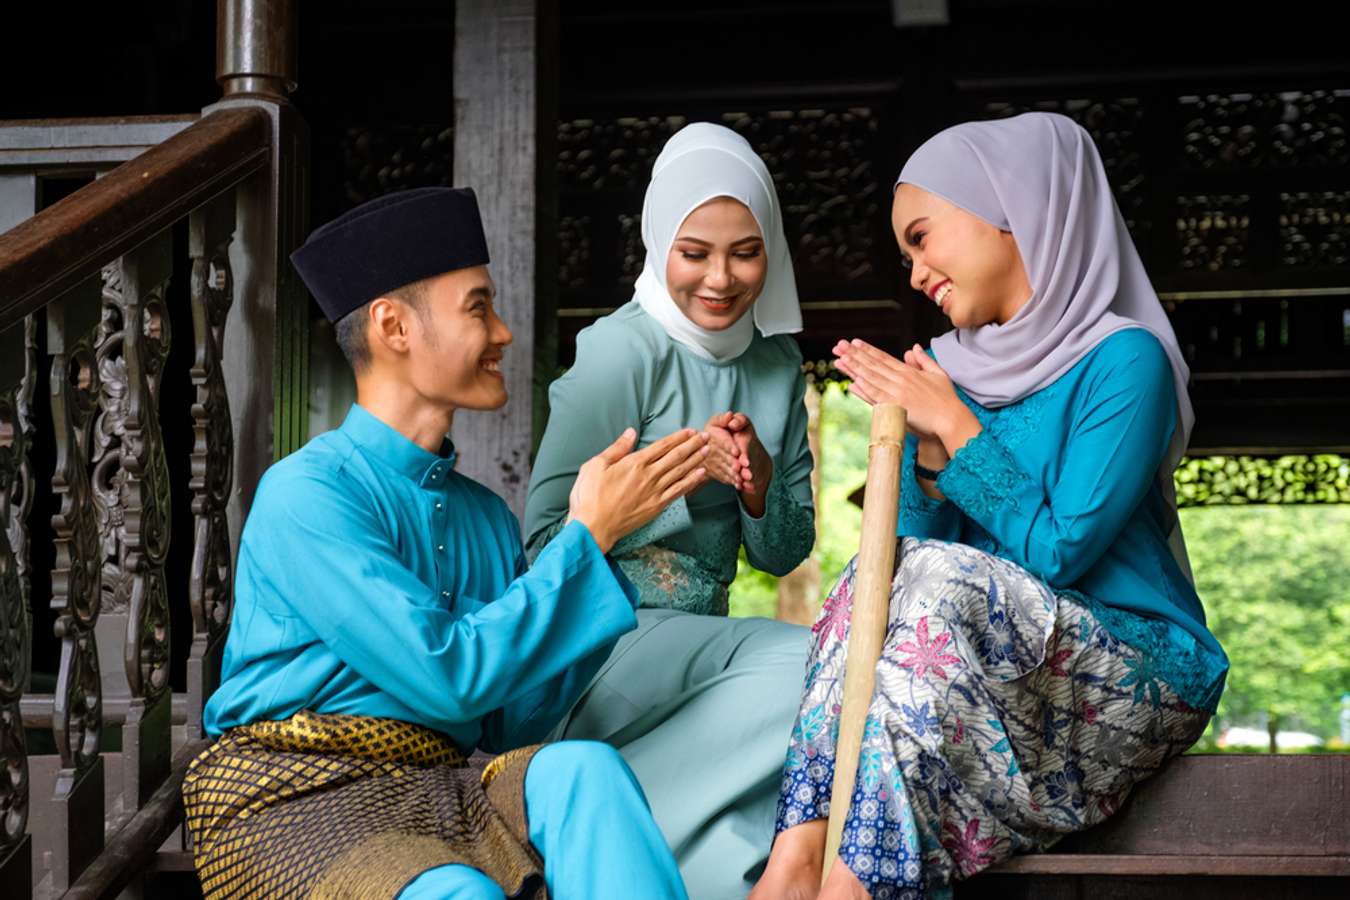 Singapore Management University on X: Selamat Hari Raya Aidilfitri to all  our Muslim friends! While this year's festivities may be a little  different, we sincerely wish you and your family an abundance